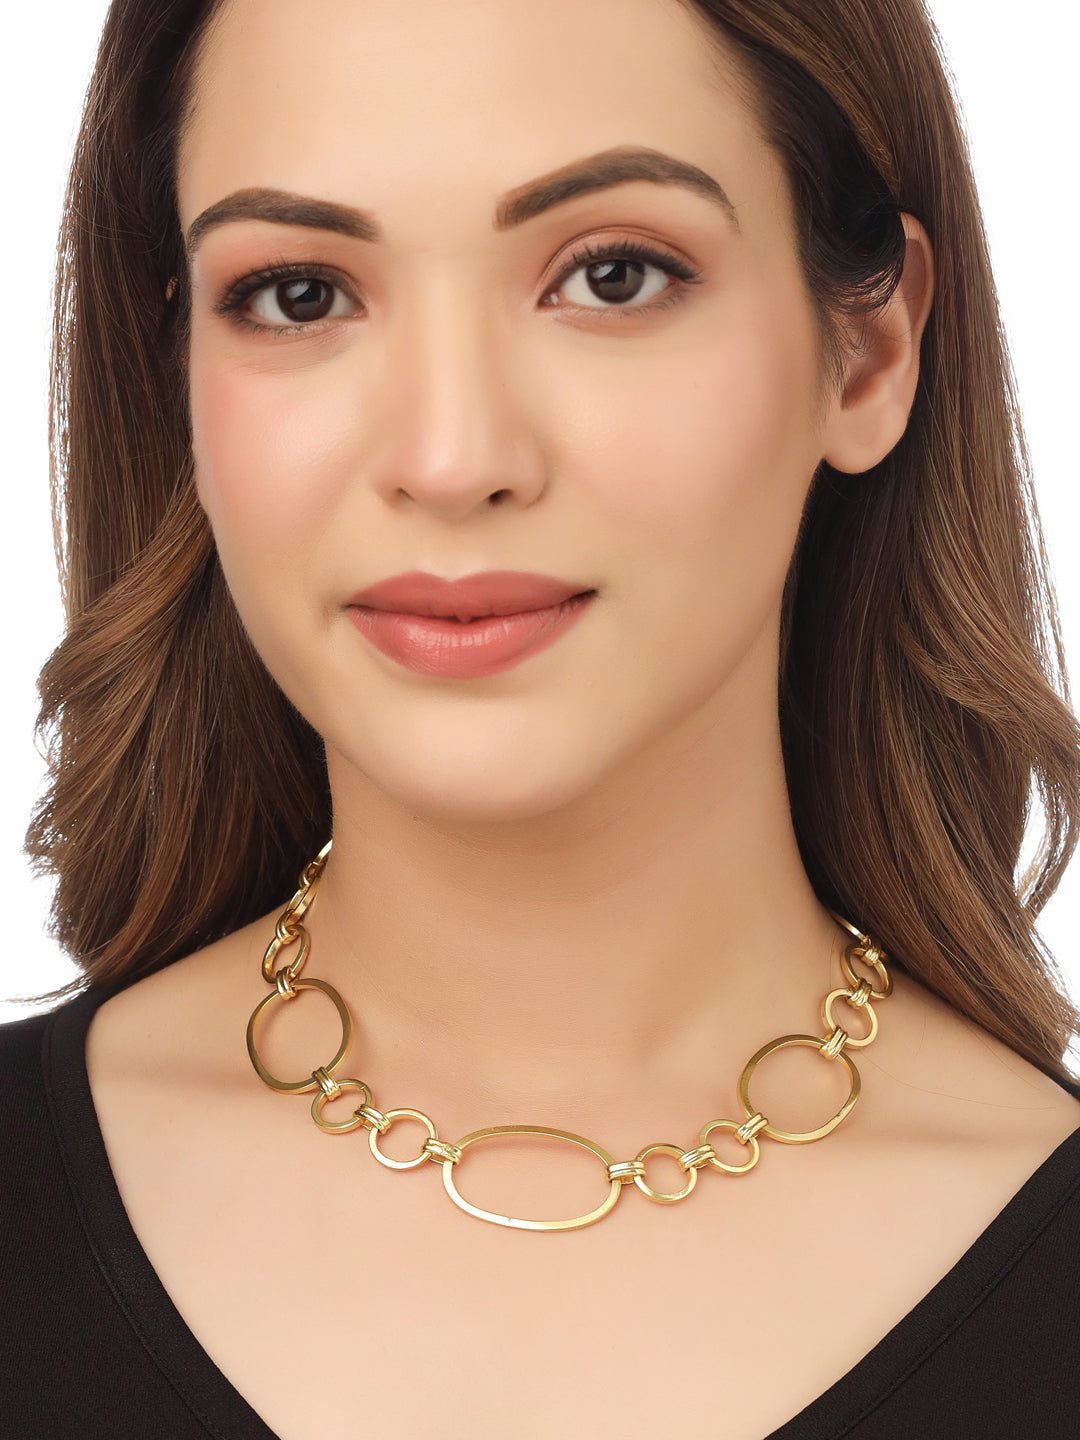 Women's gold plated statement Necklace - NVR